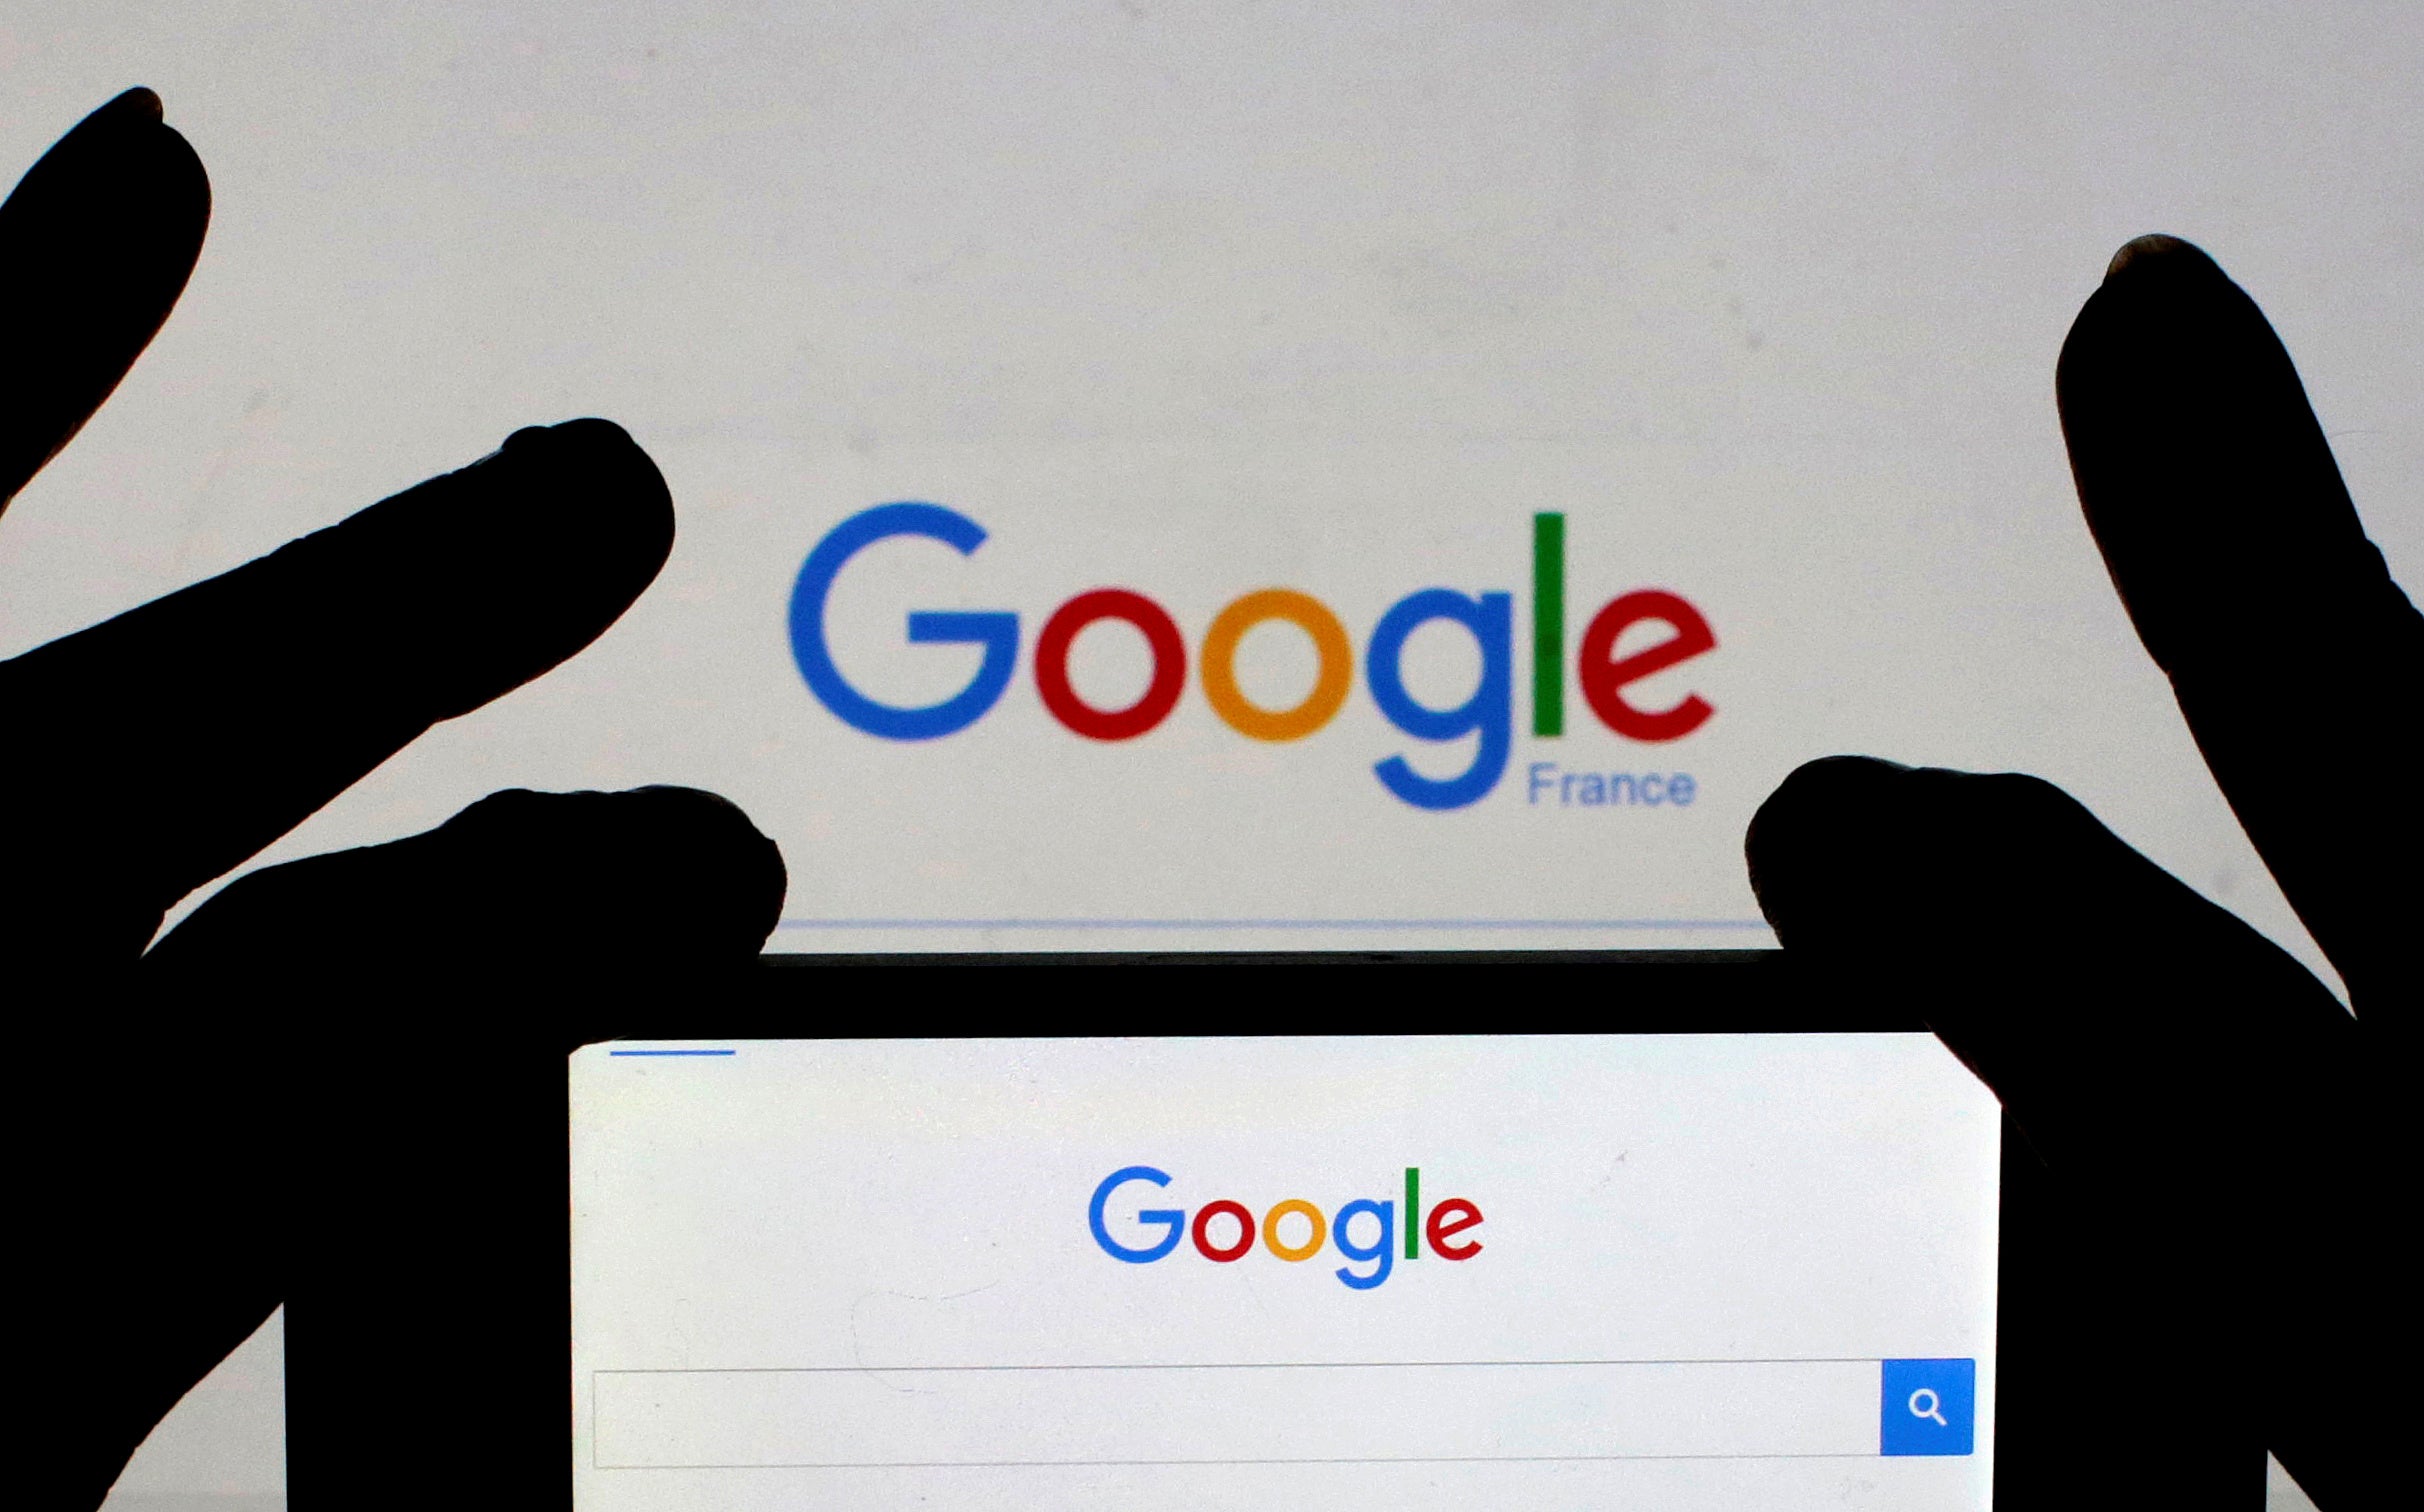 Google refuses to pay publishers in France under first 'link tax' legislation